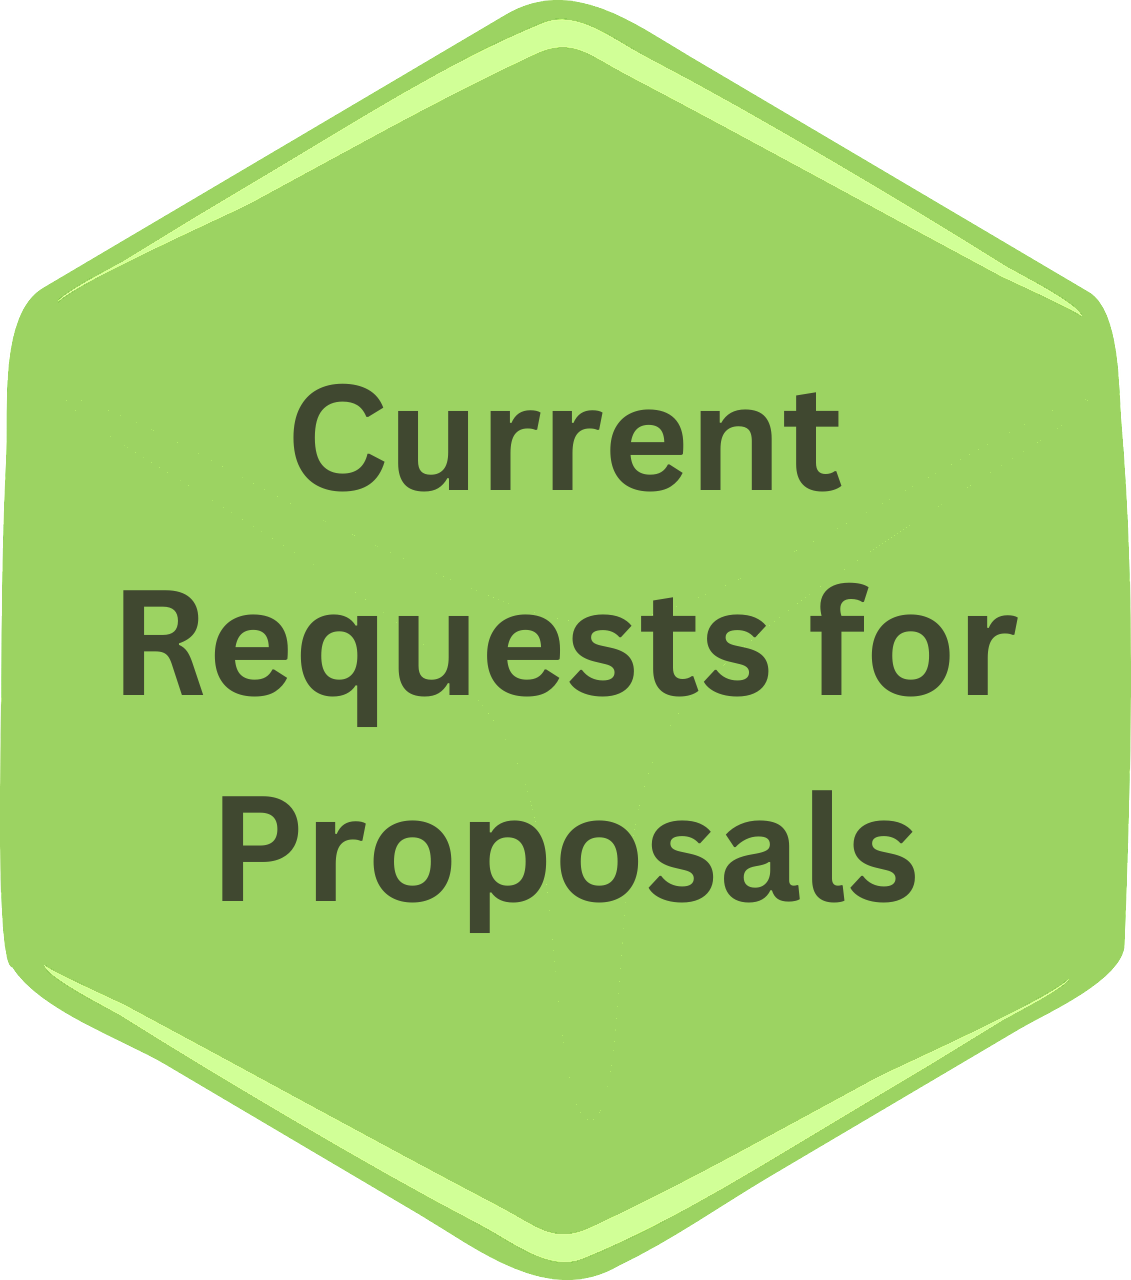 Requests for Proposals link